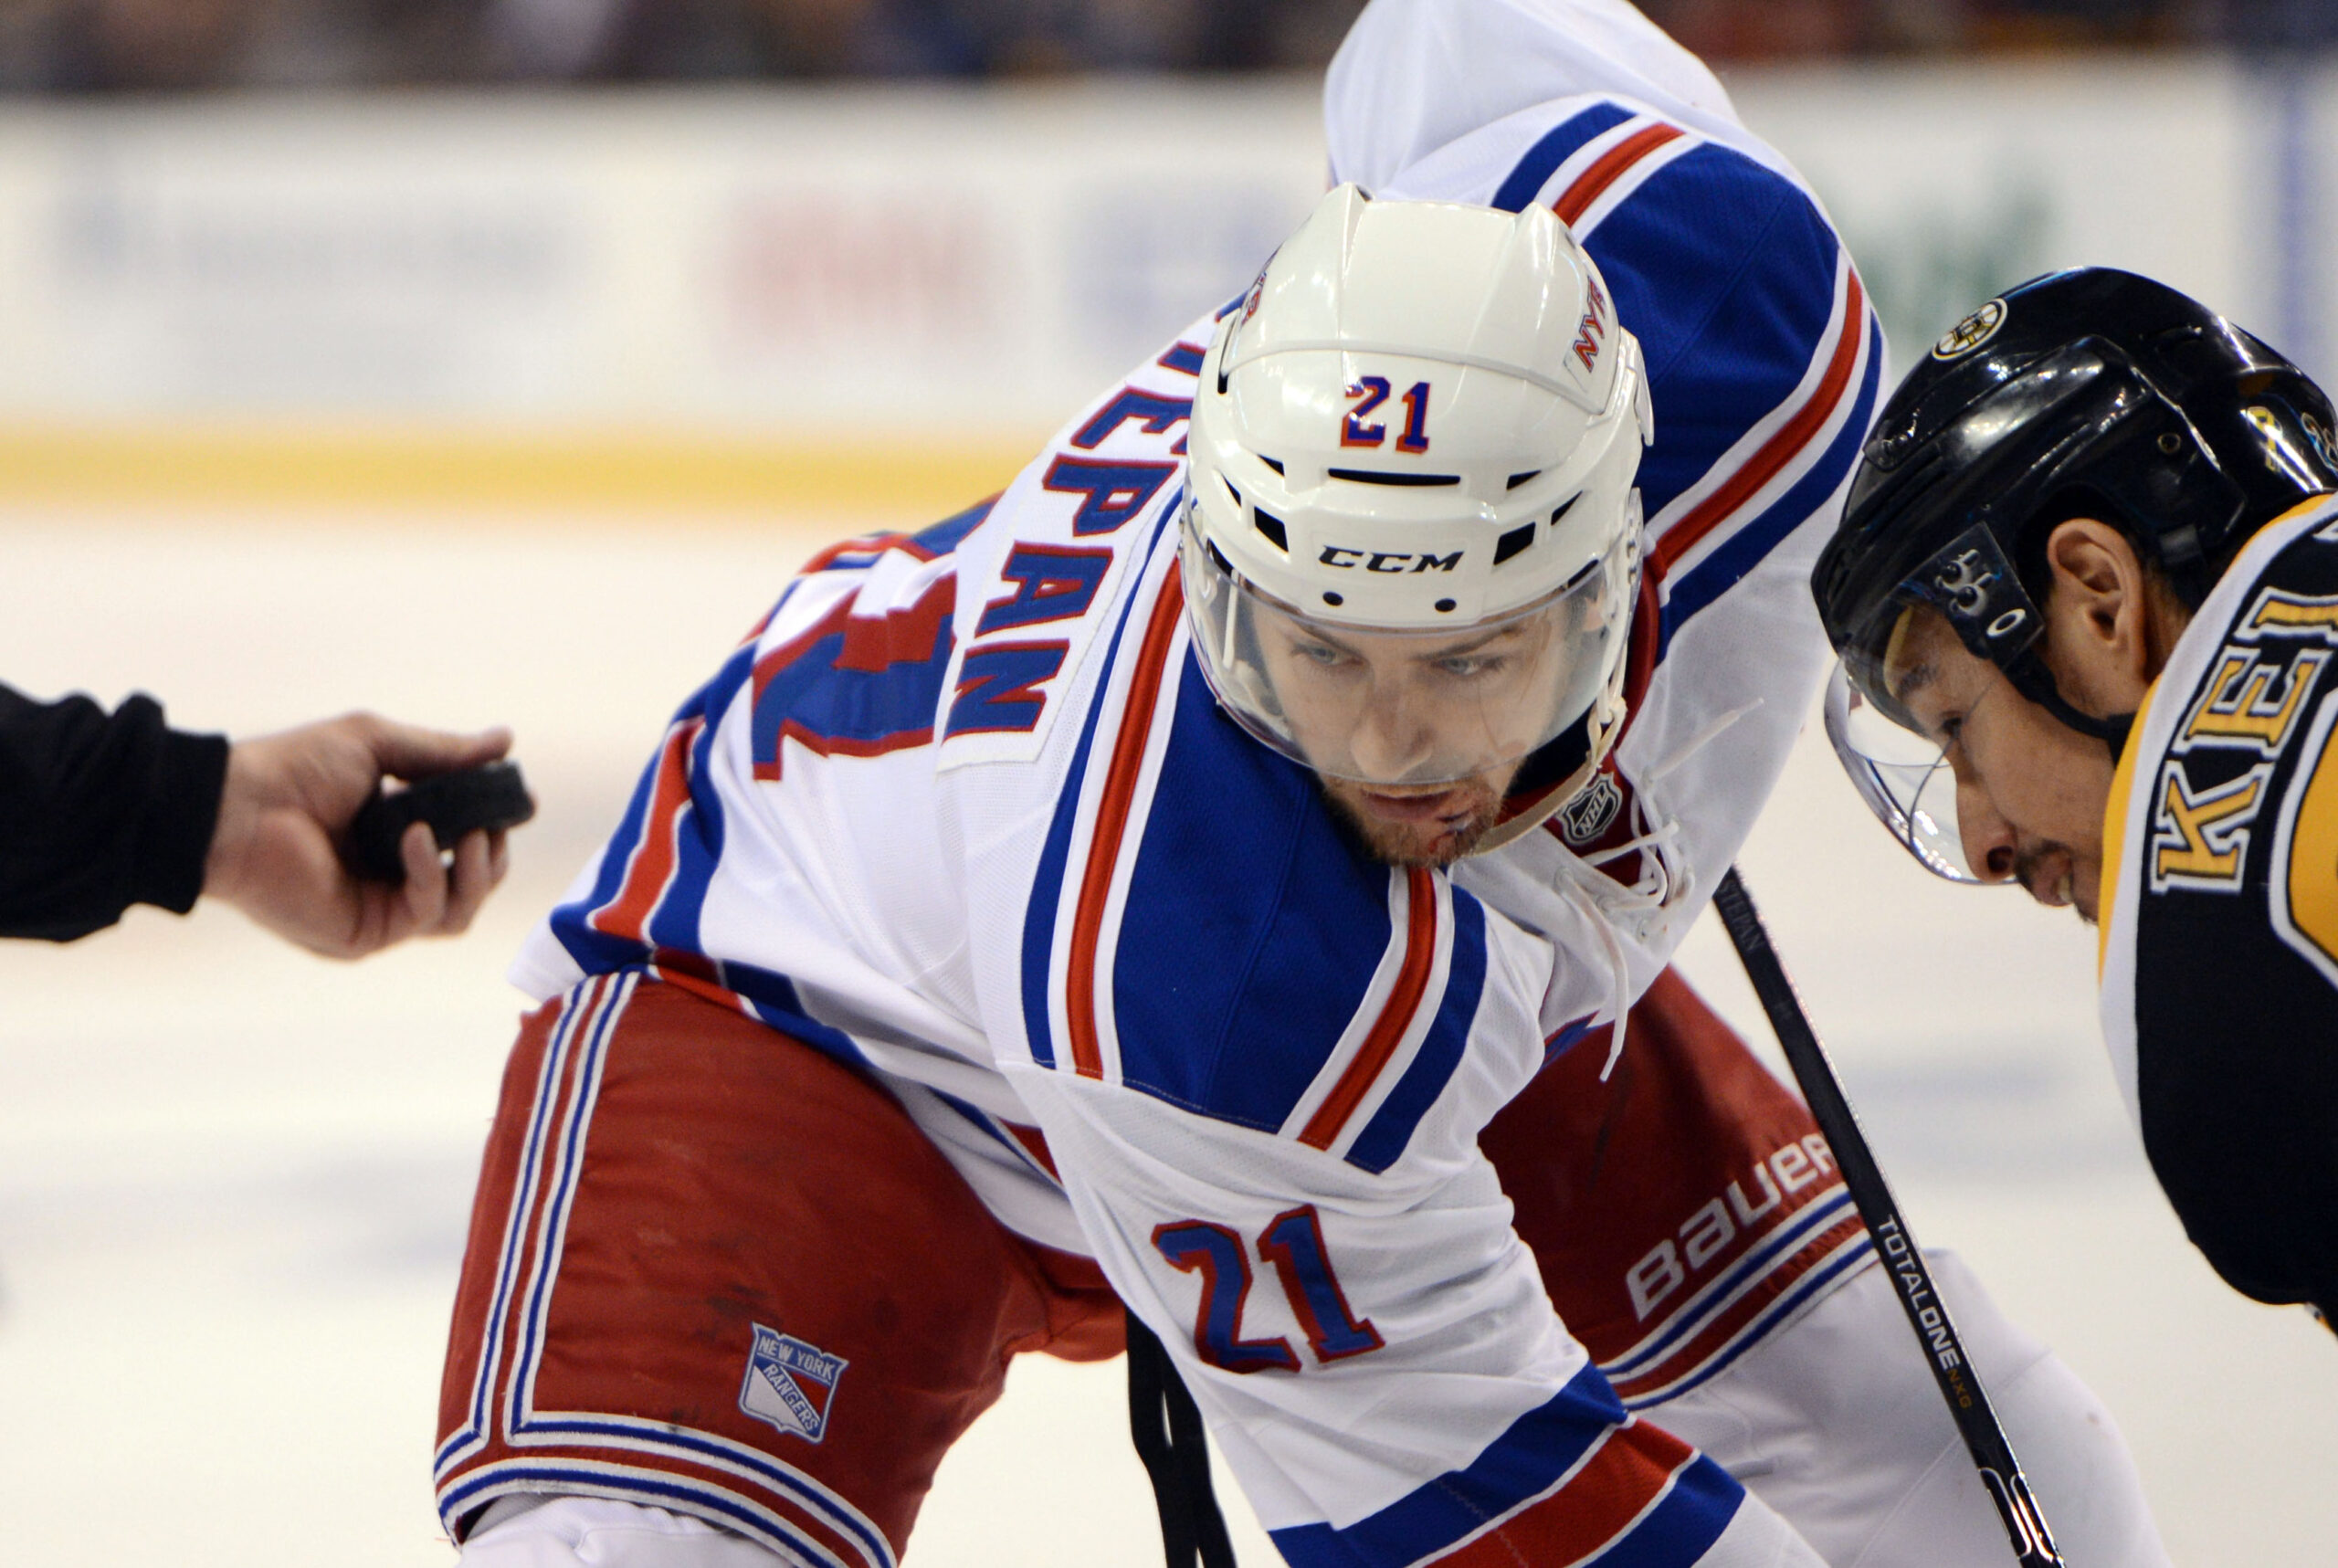 Stepan retires from the NHL after 13 seasons